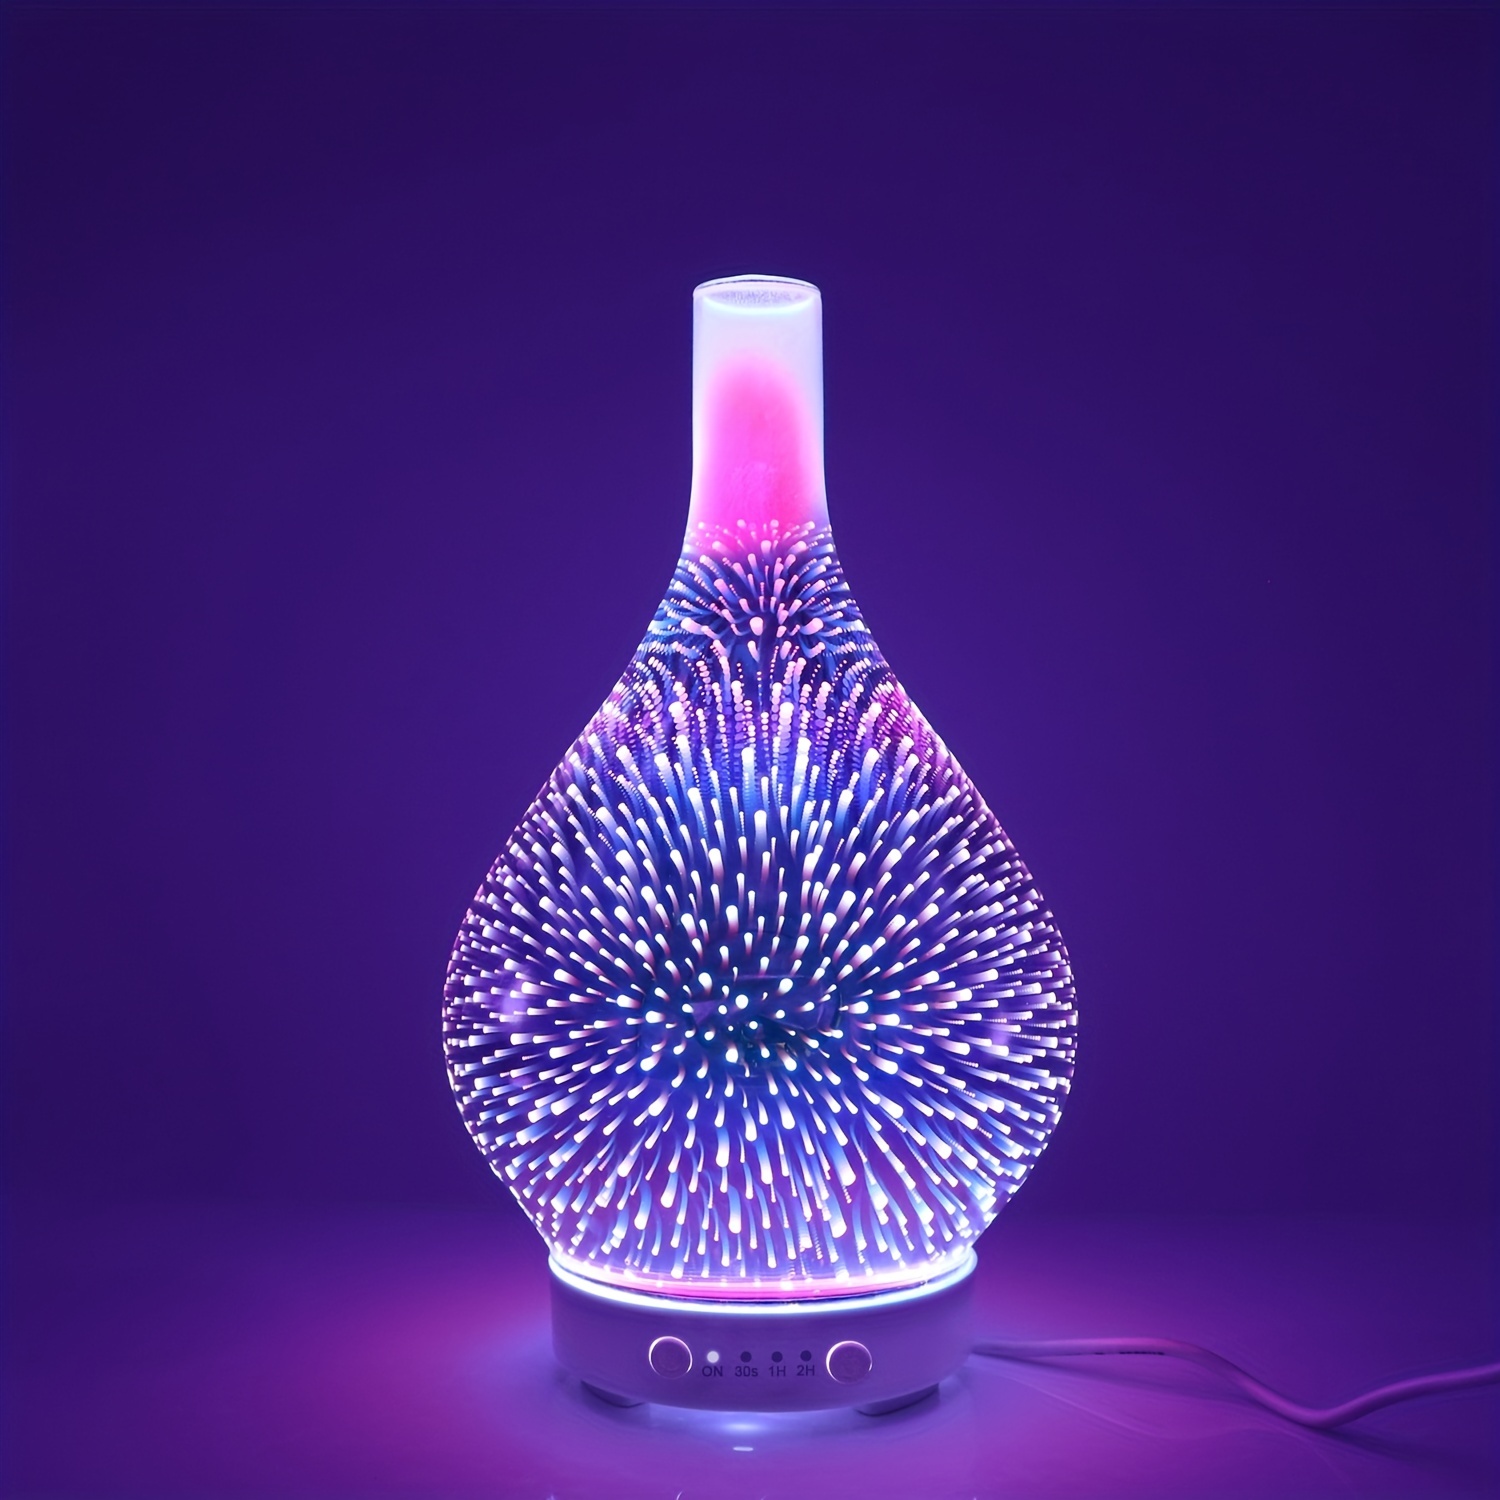 

1pc Essential Oil Diffuser, 3d Fireworks Glass Aromatherapy Ultrasonic Humidifier, Self-closing With Timer Setting, 7 Colors, Suitable For Bedroom, Living Room, Office, Spa, 200ml, Bpa-free